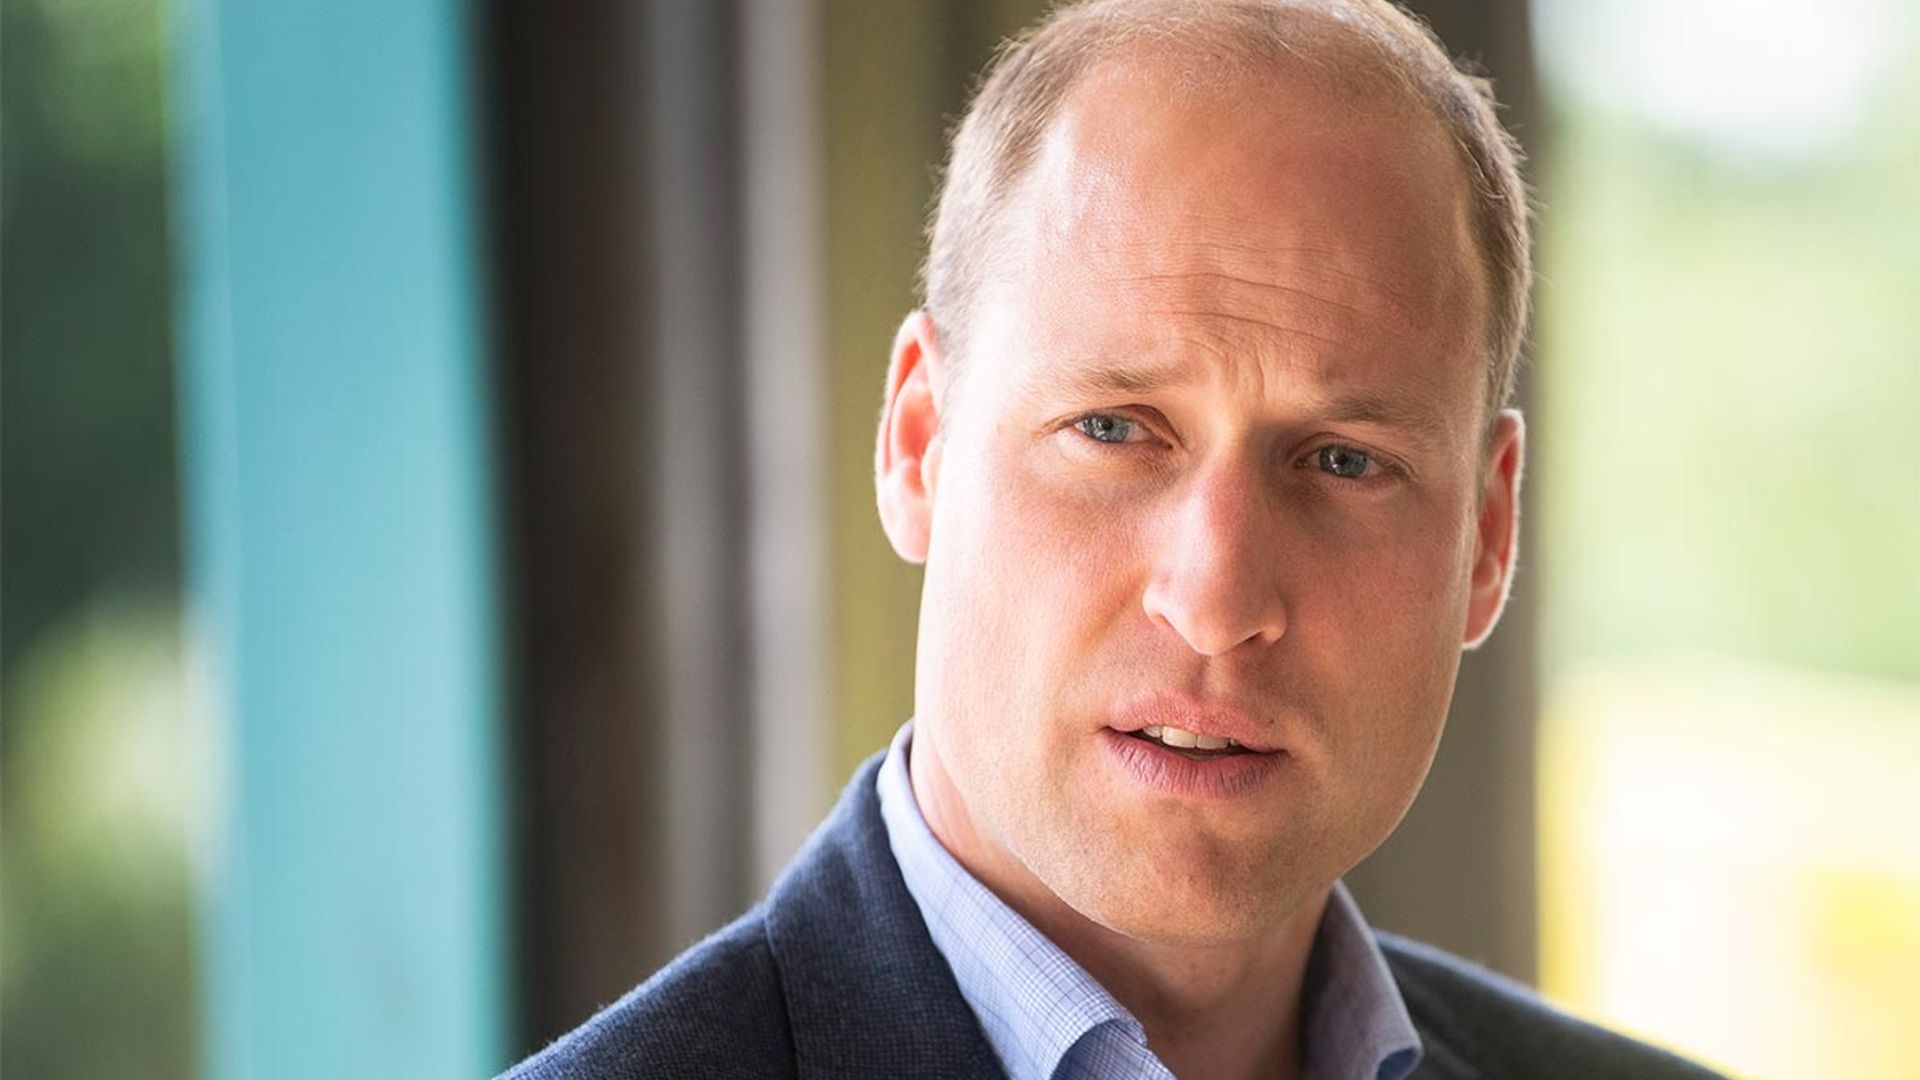 Prince William reveals what keeps him up at night